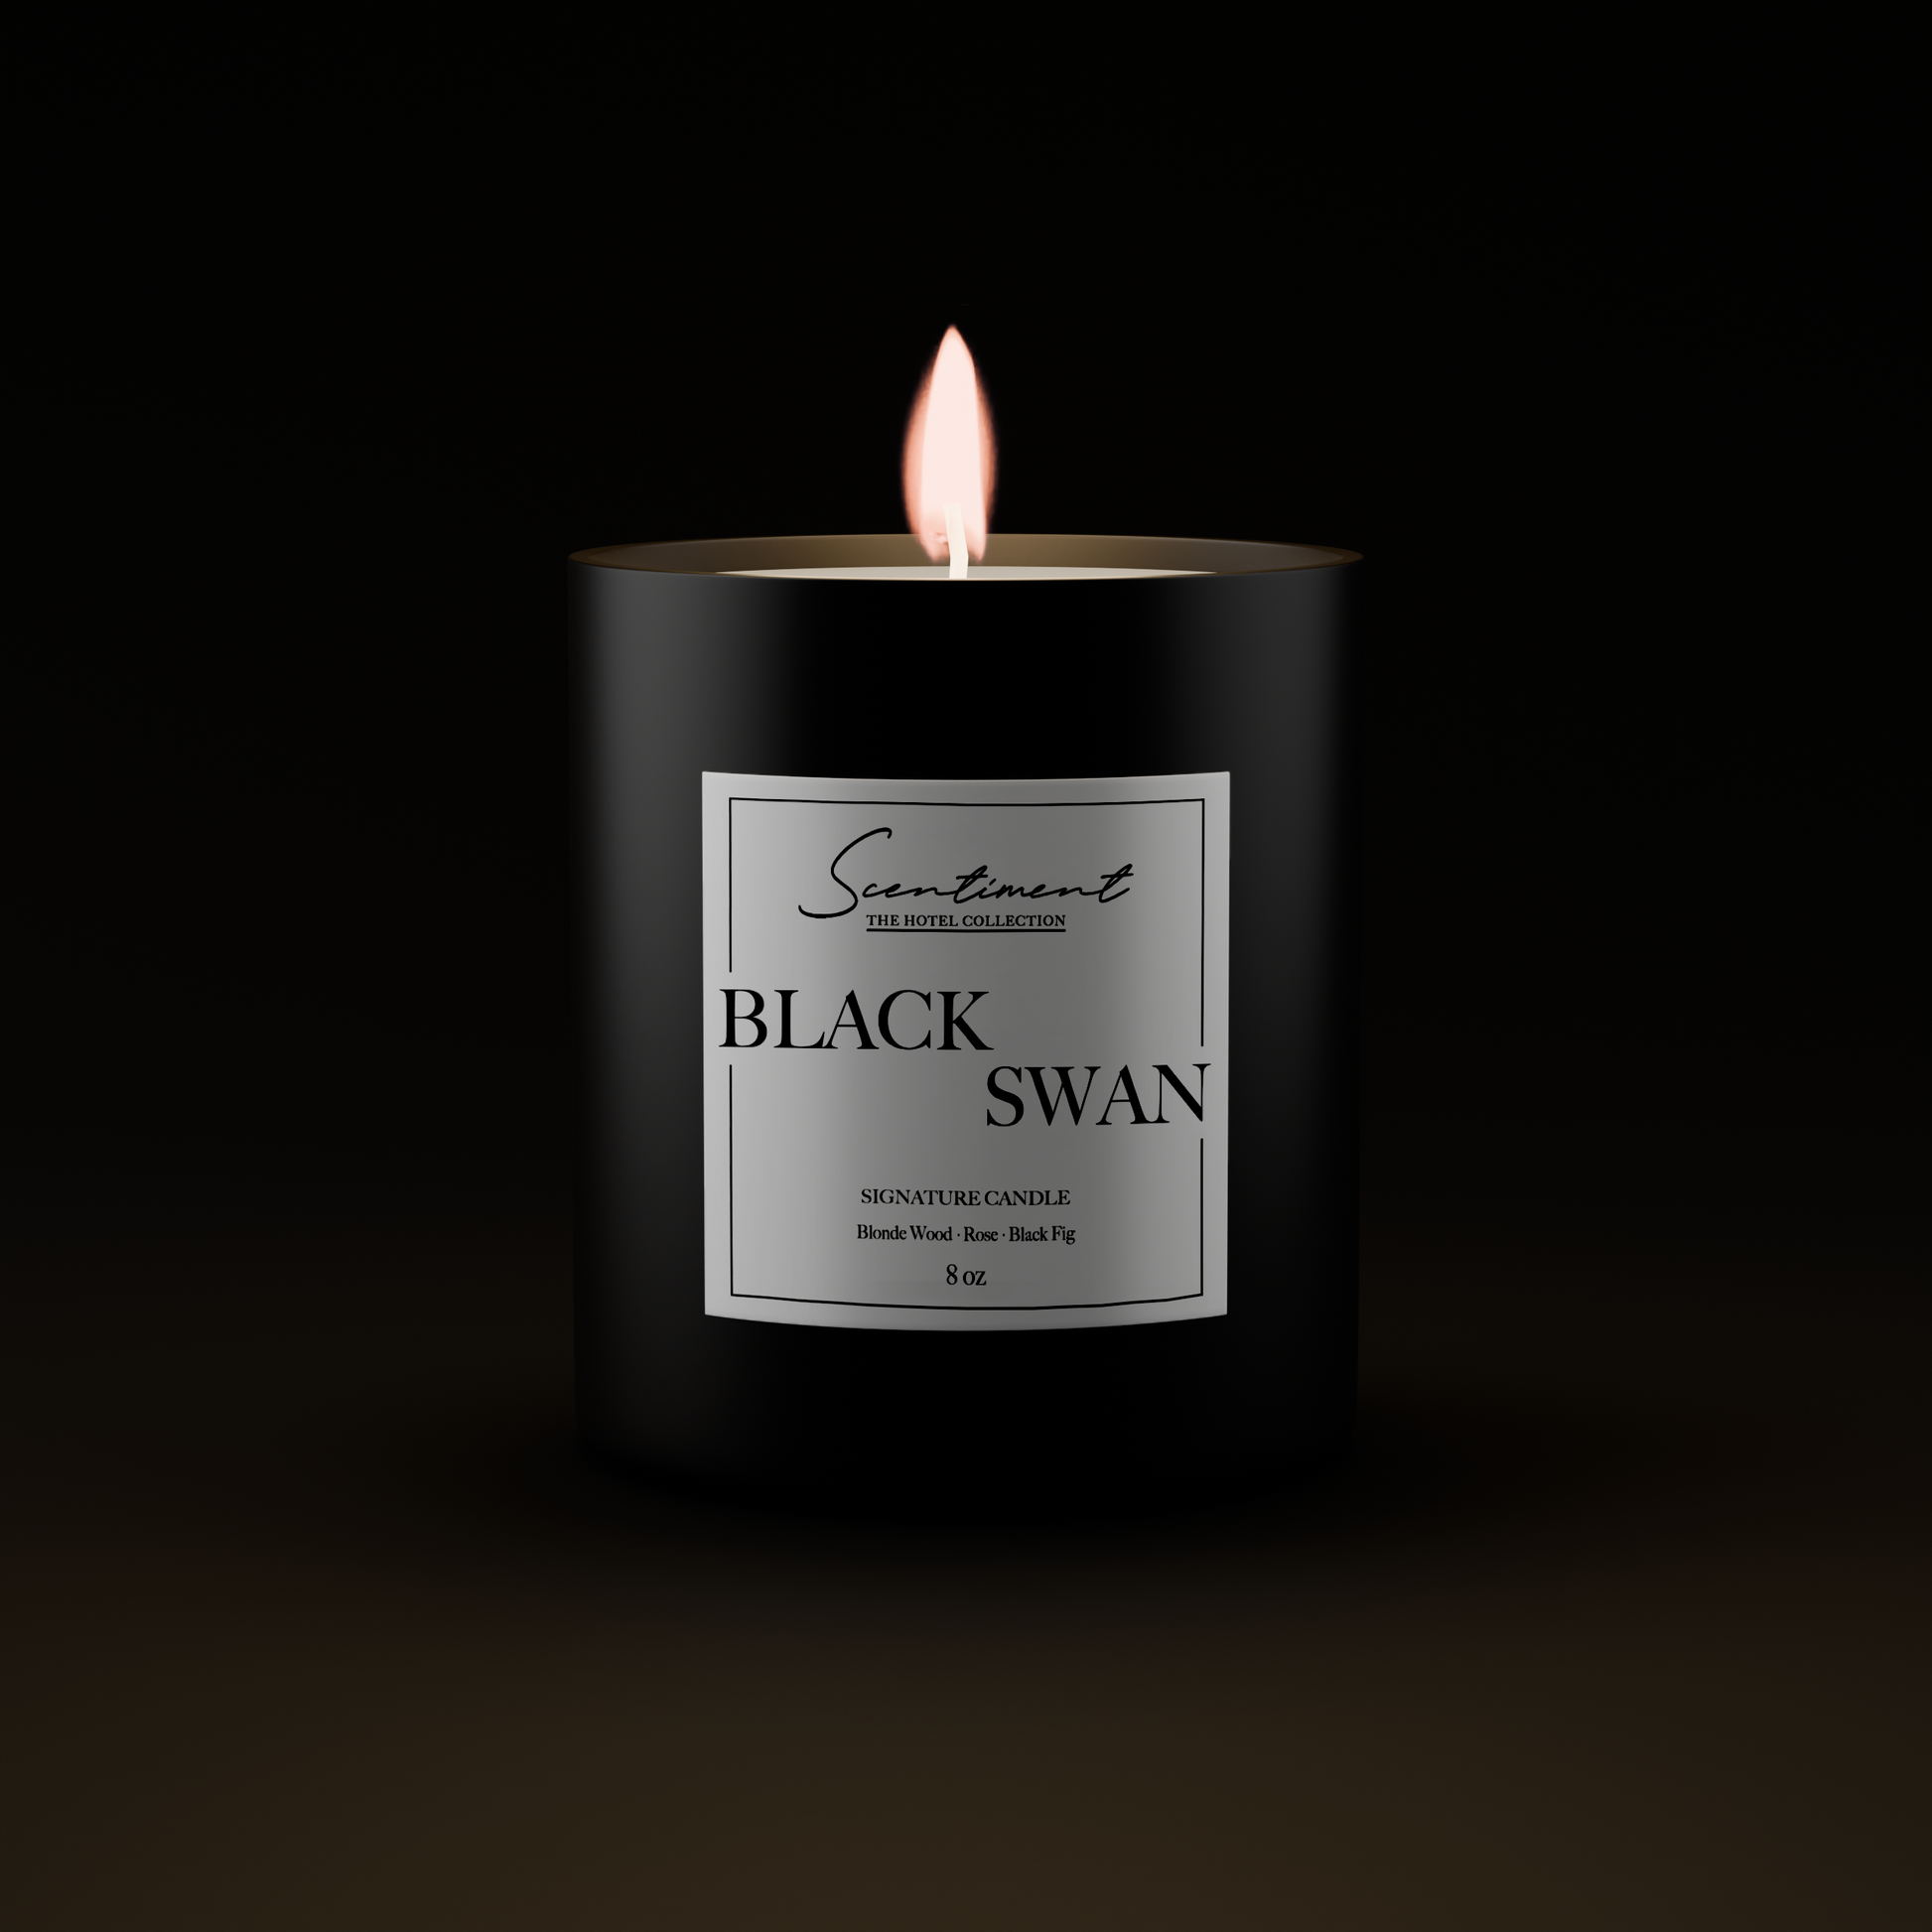 Black Swan Candle Inspired by the New York EDITION Hotel®